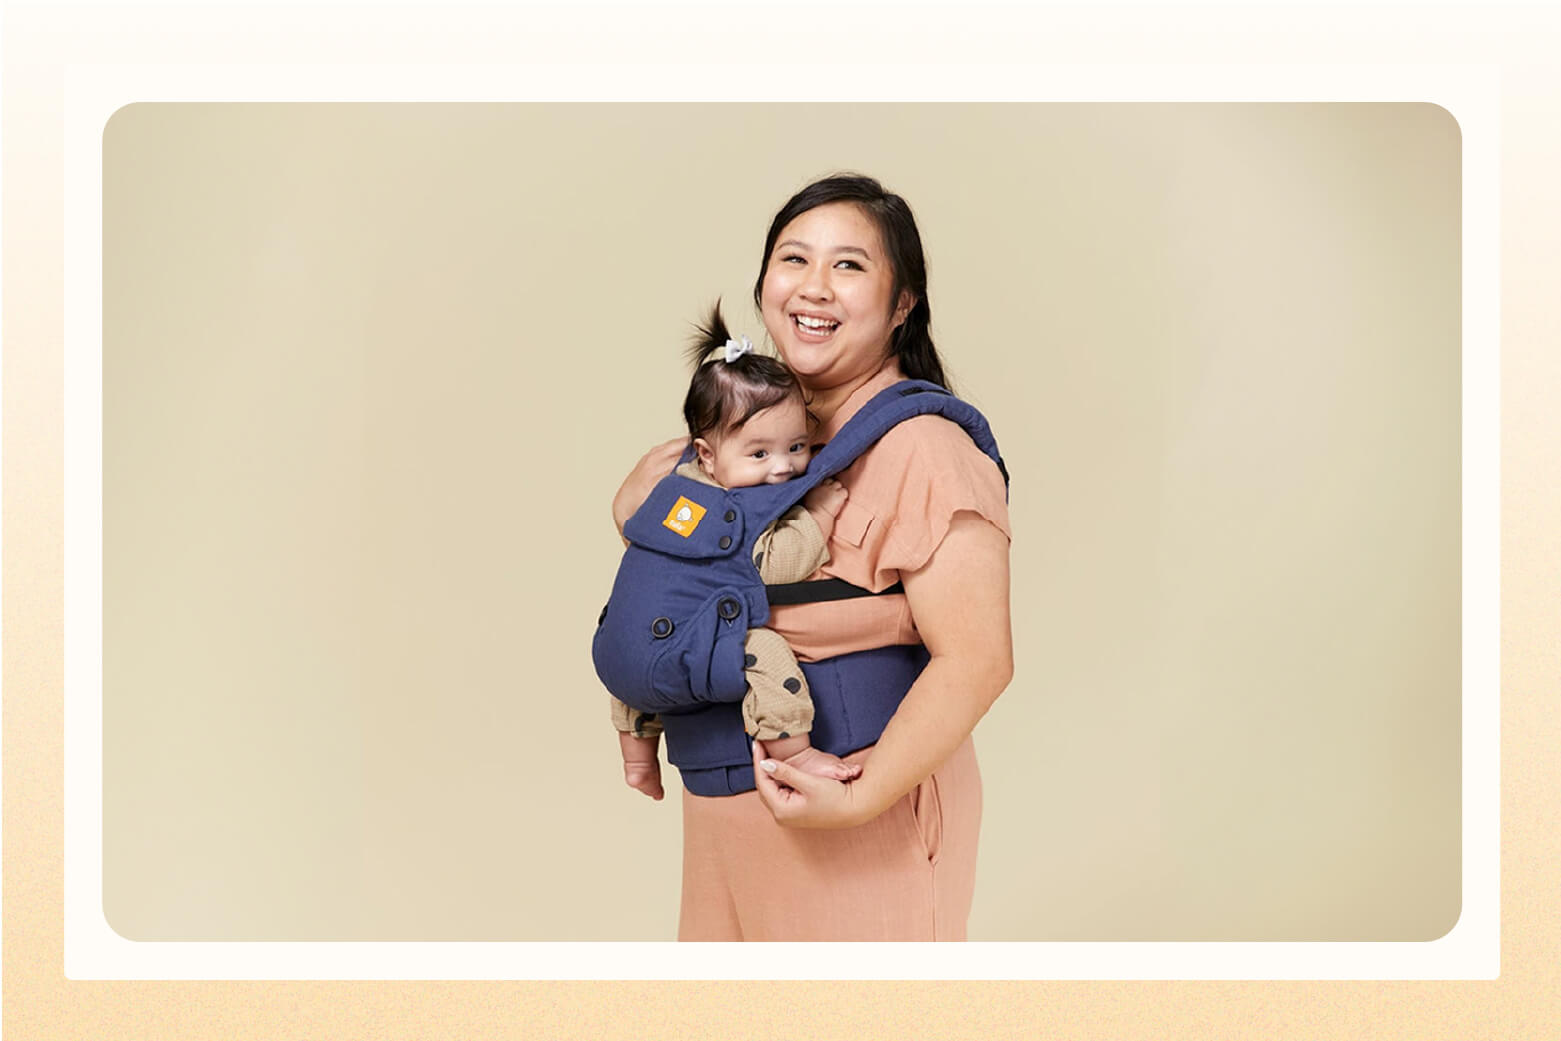 Smiling mom wearing a blue baby carrier on her chest with baby in it